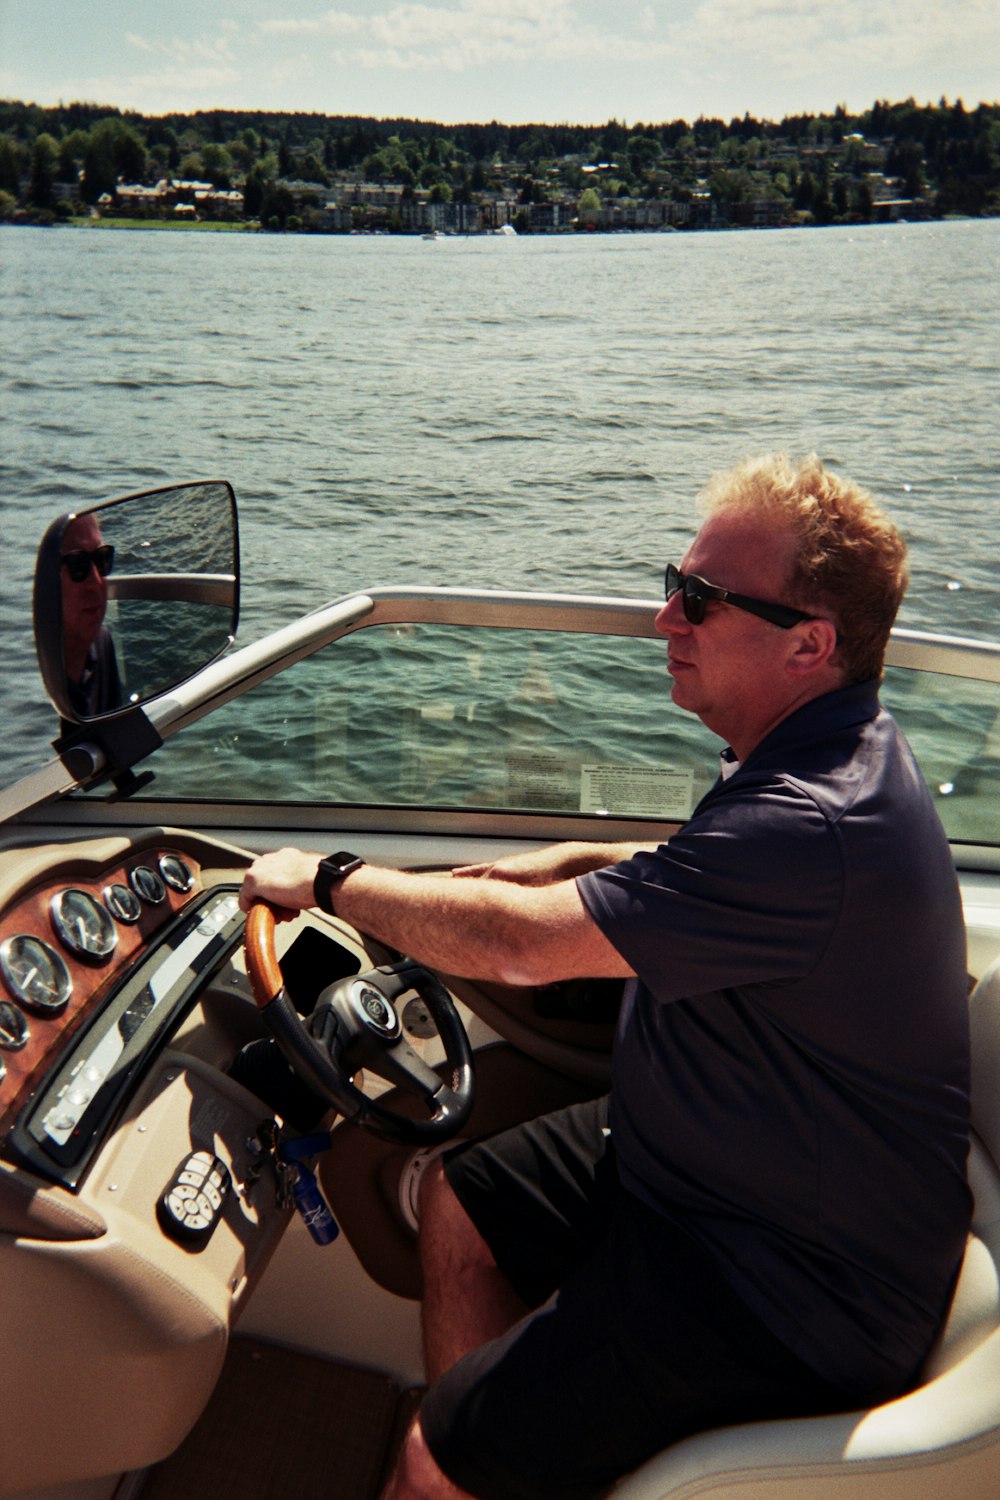 man in black shirt riding on white and red motor boat during daytime